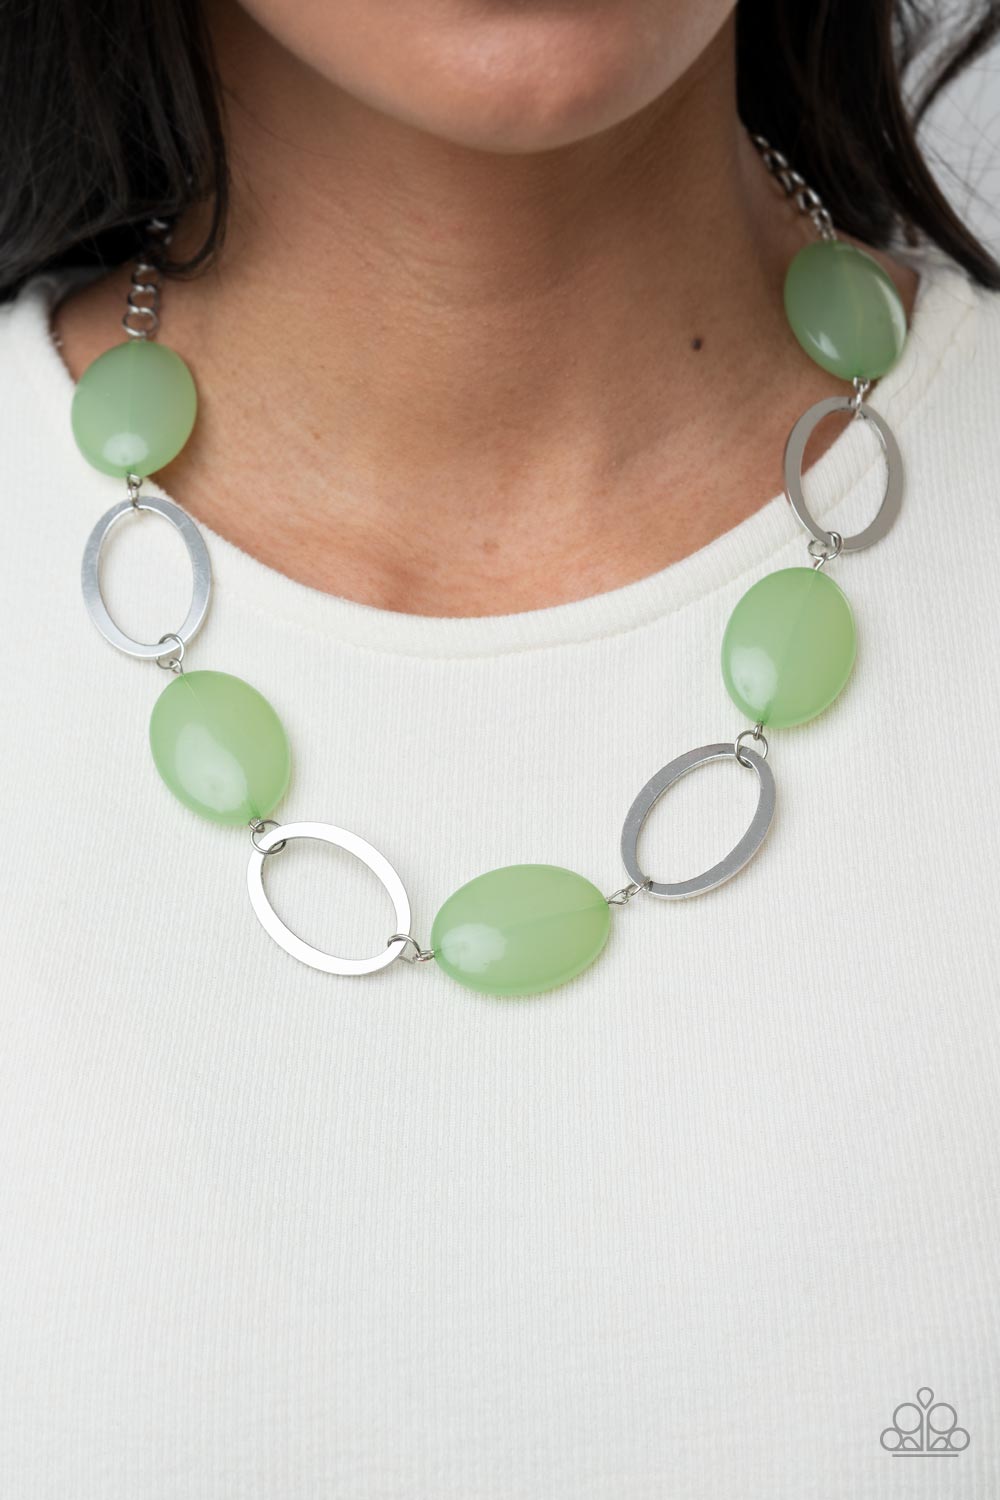 Beachside Boardwalk Green Necklace - Paparazzi Accessories  Shiny silver ovals and glassy green oval beads delicately link across the chest, creating a whimsical pop of color. Features an adjustable clasp closure.  All Paparazzi Accessories are lead free and nickel free!  Sold as one individual necklace. Includes one pair of matching earrings.